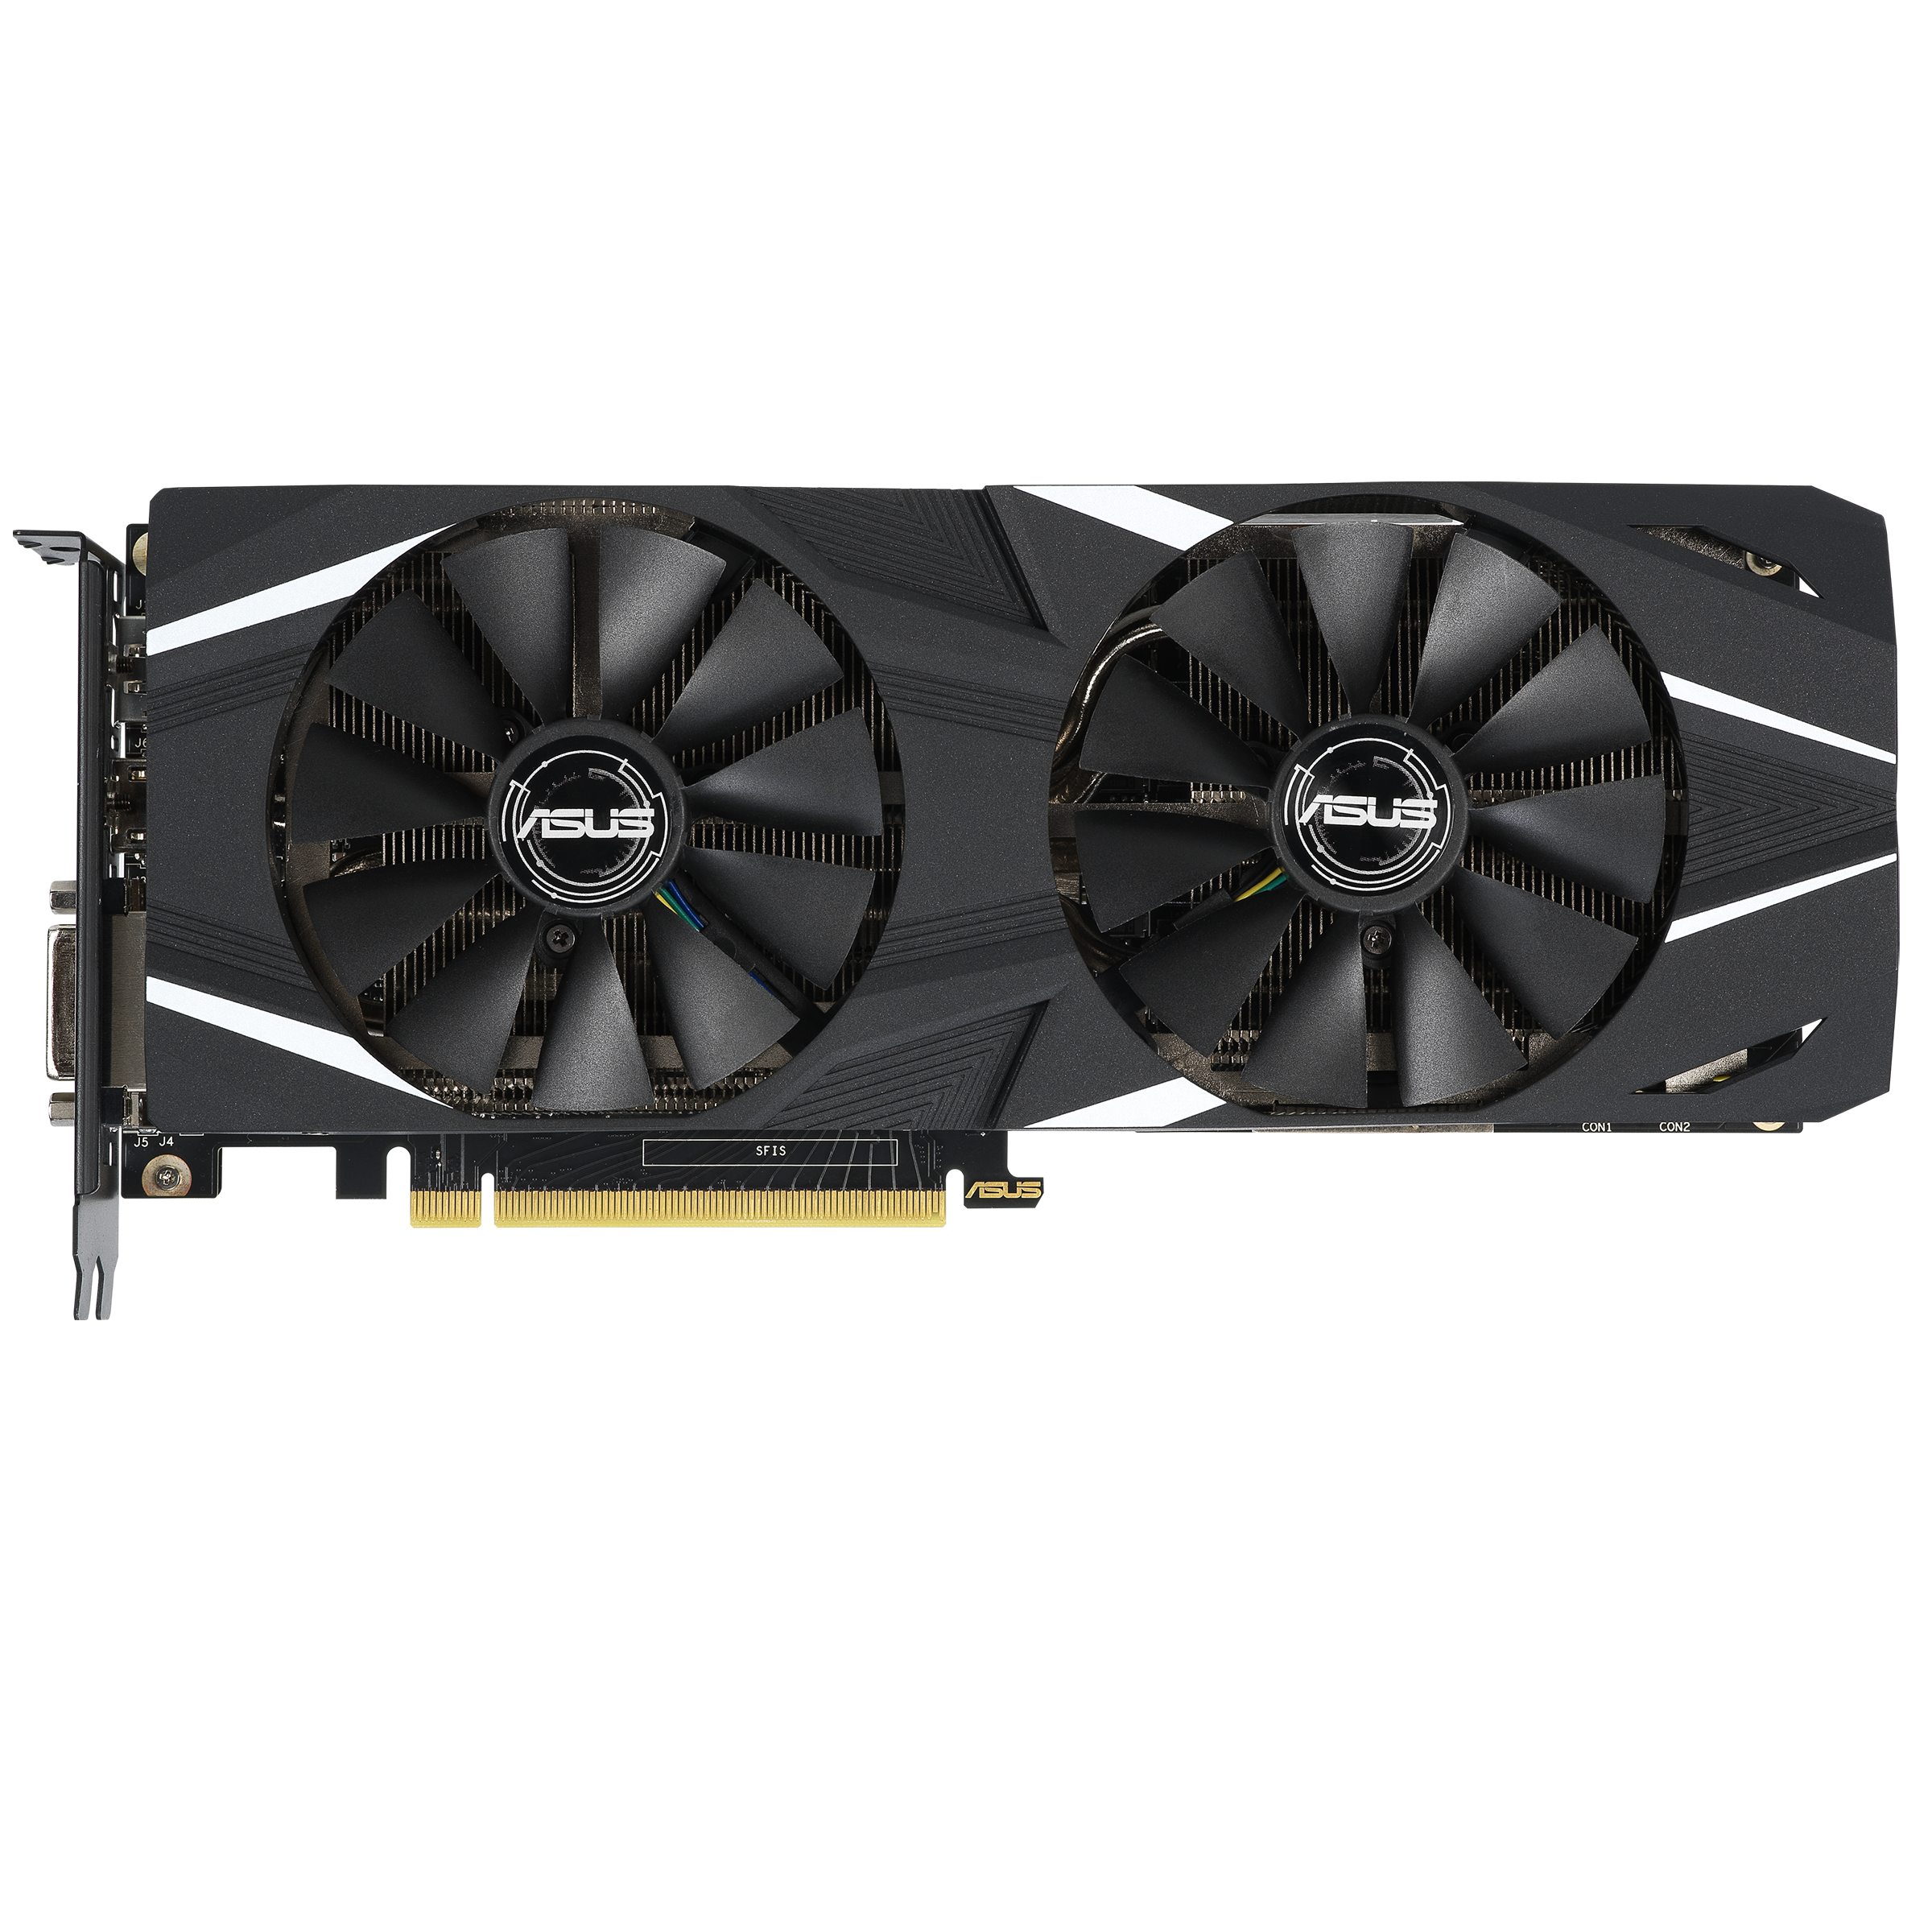 DUAL-RTX2060-6G｜Graphics Cards｜ASUS Global